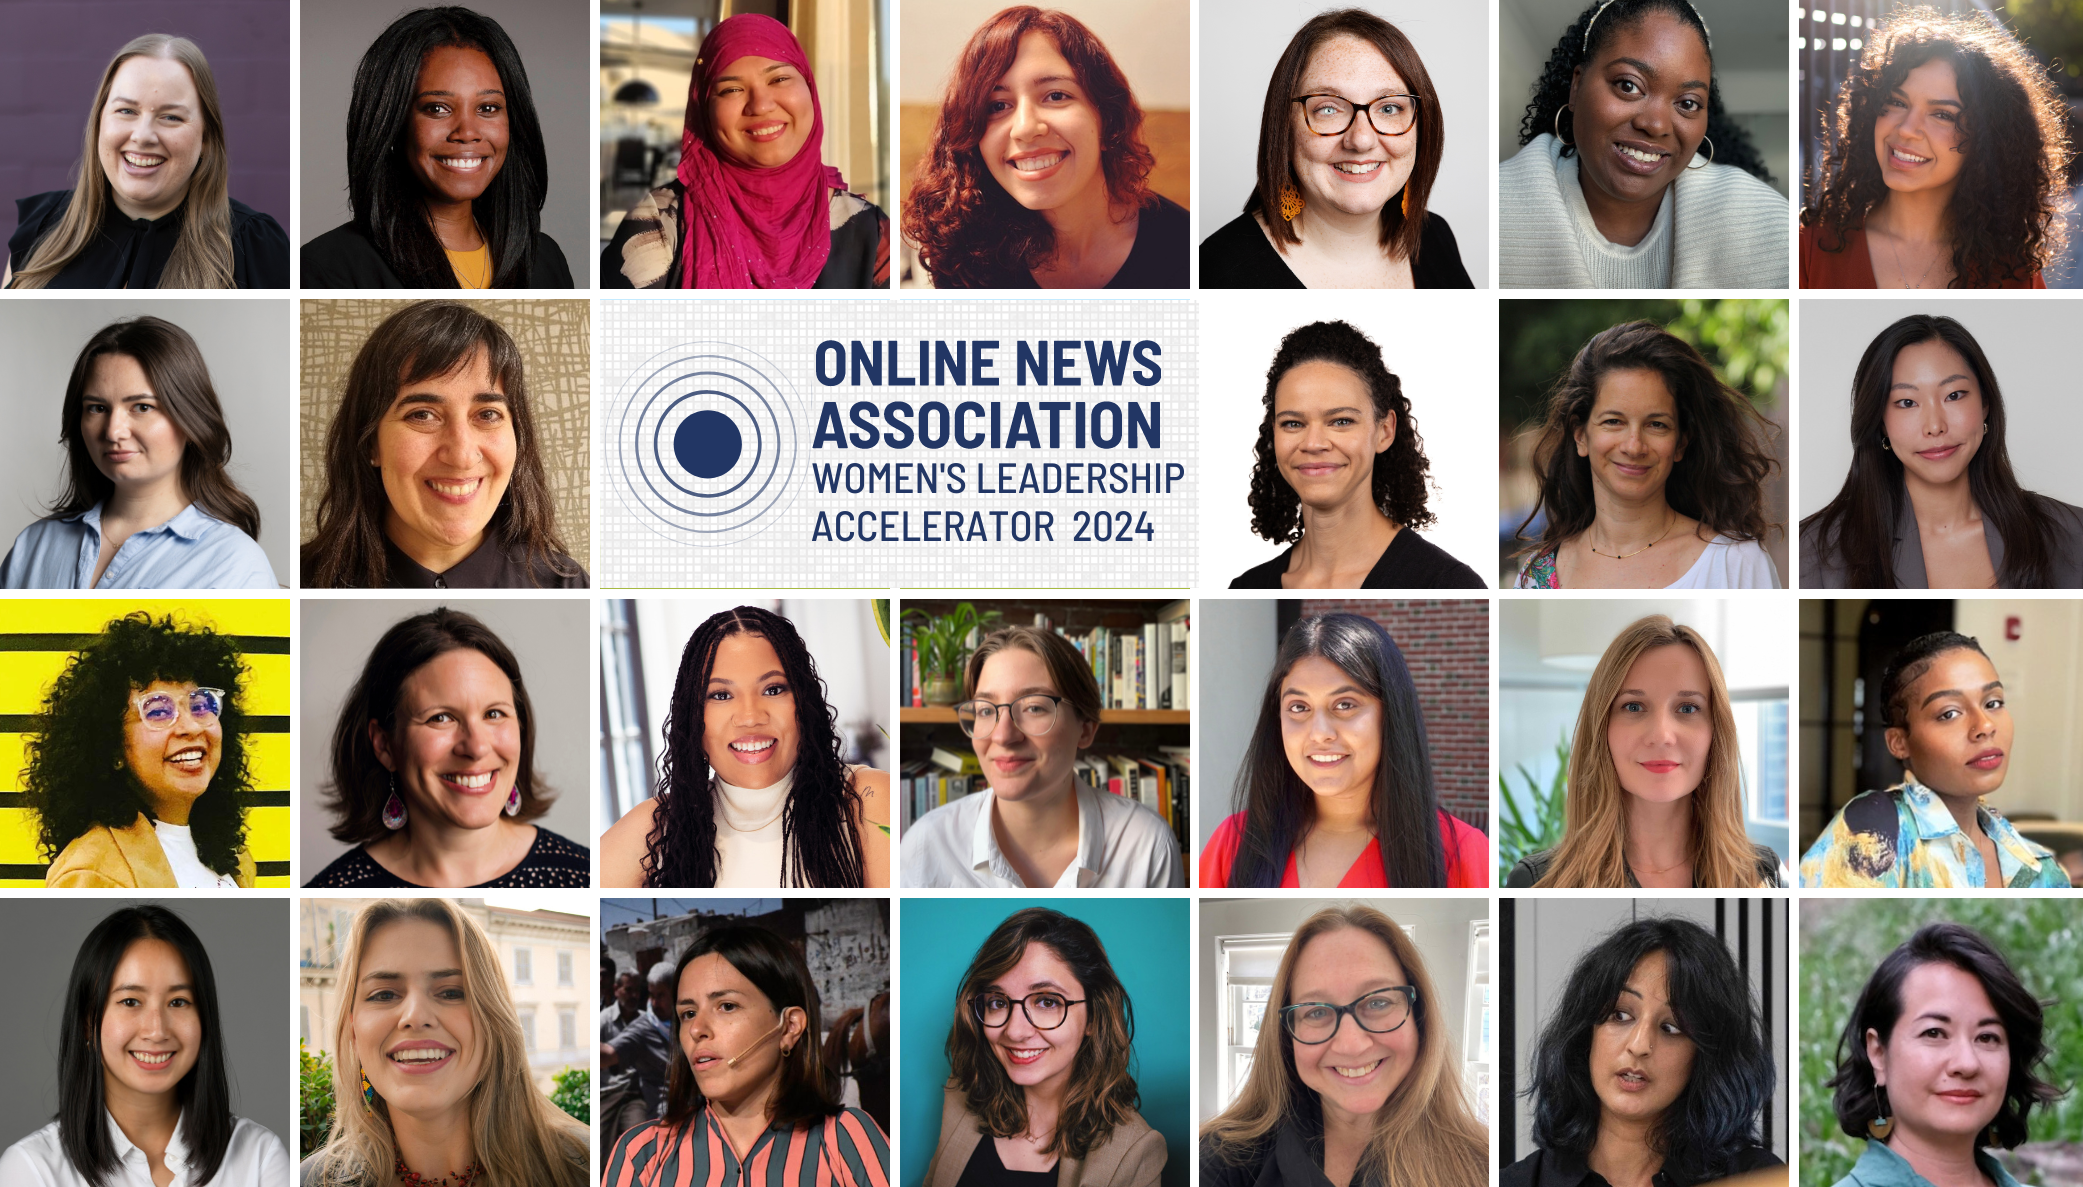 Headshots of the 26 members of the 2024 Online News Association's Women's Leadership Accelerator arranged in a grid.